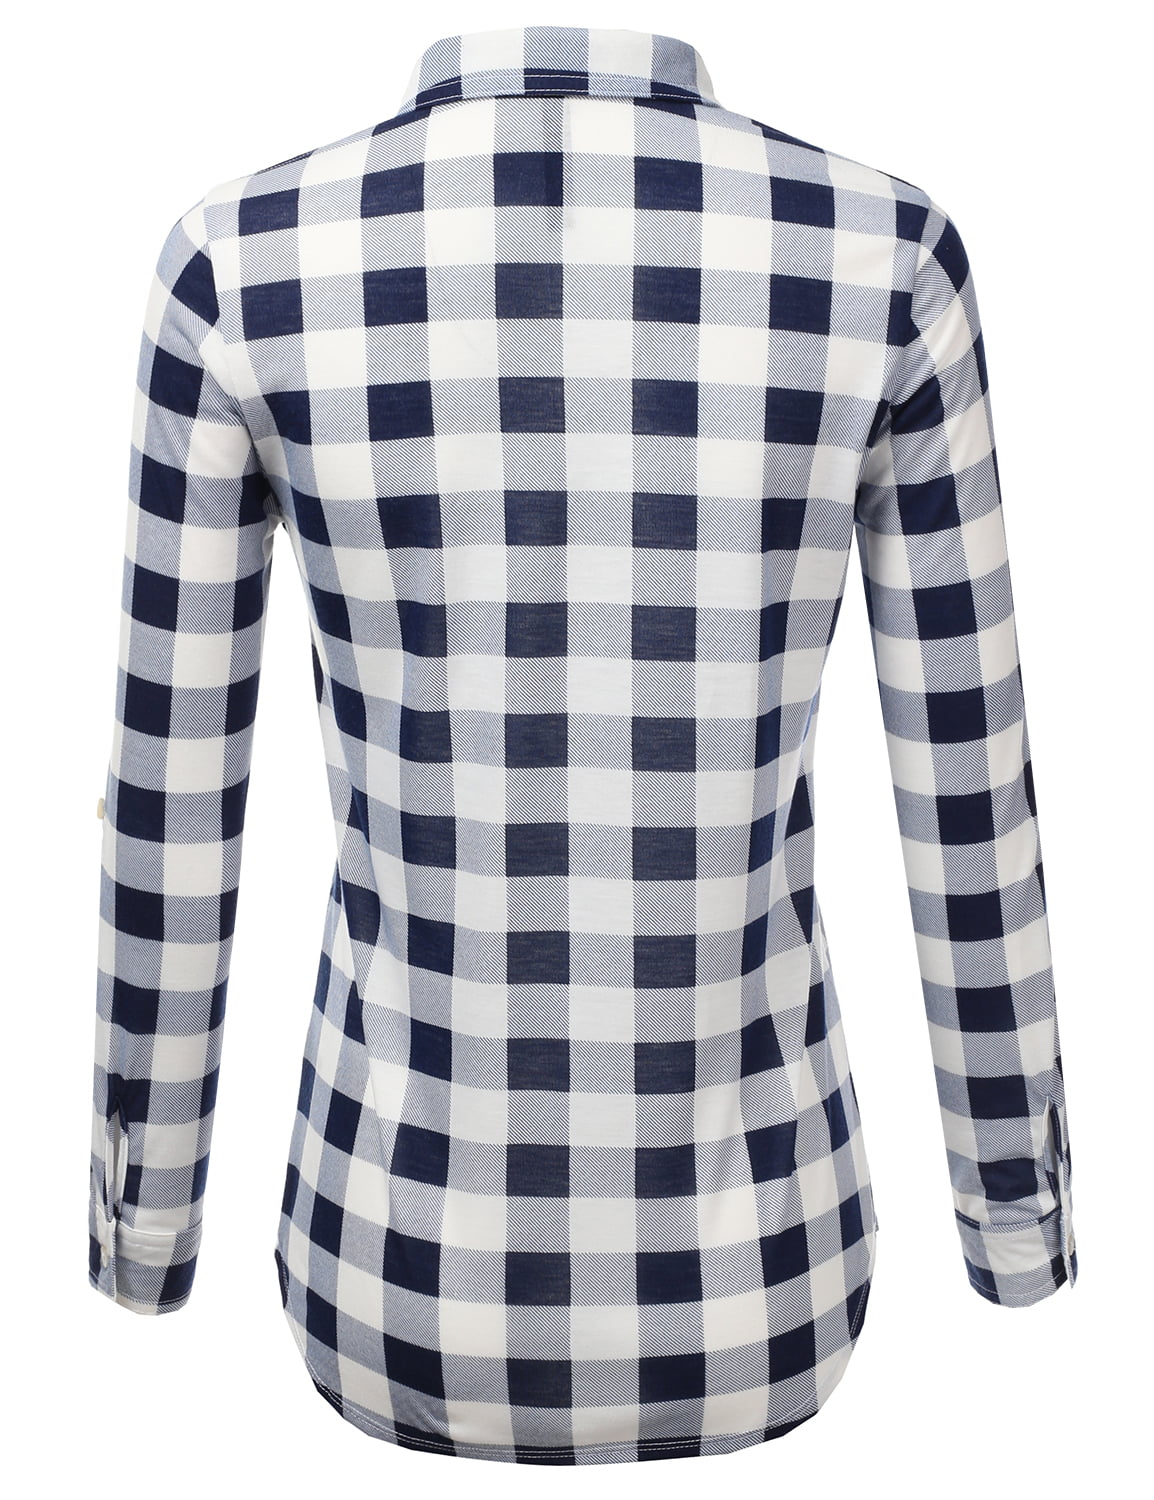 JJ Perfection Women's Long Sleeve Collared Button Down Plaid Flannel Shirt 